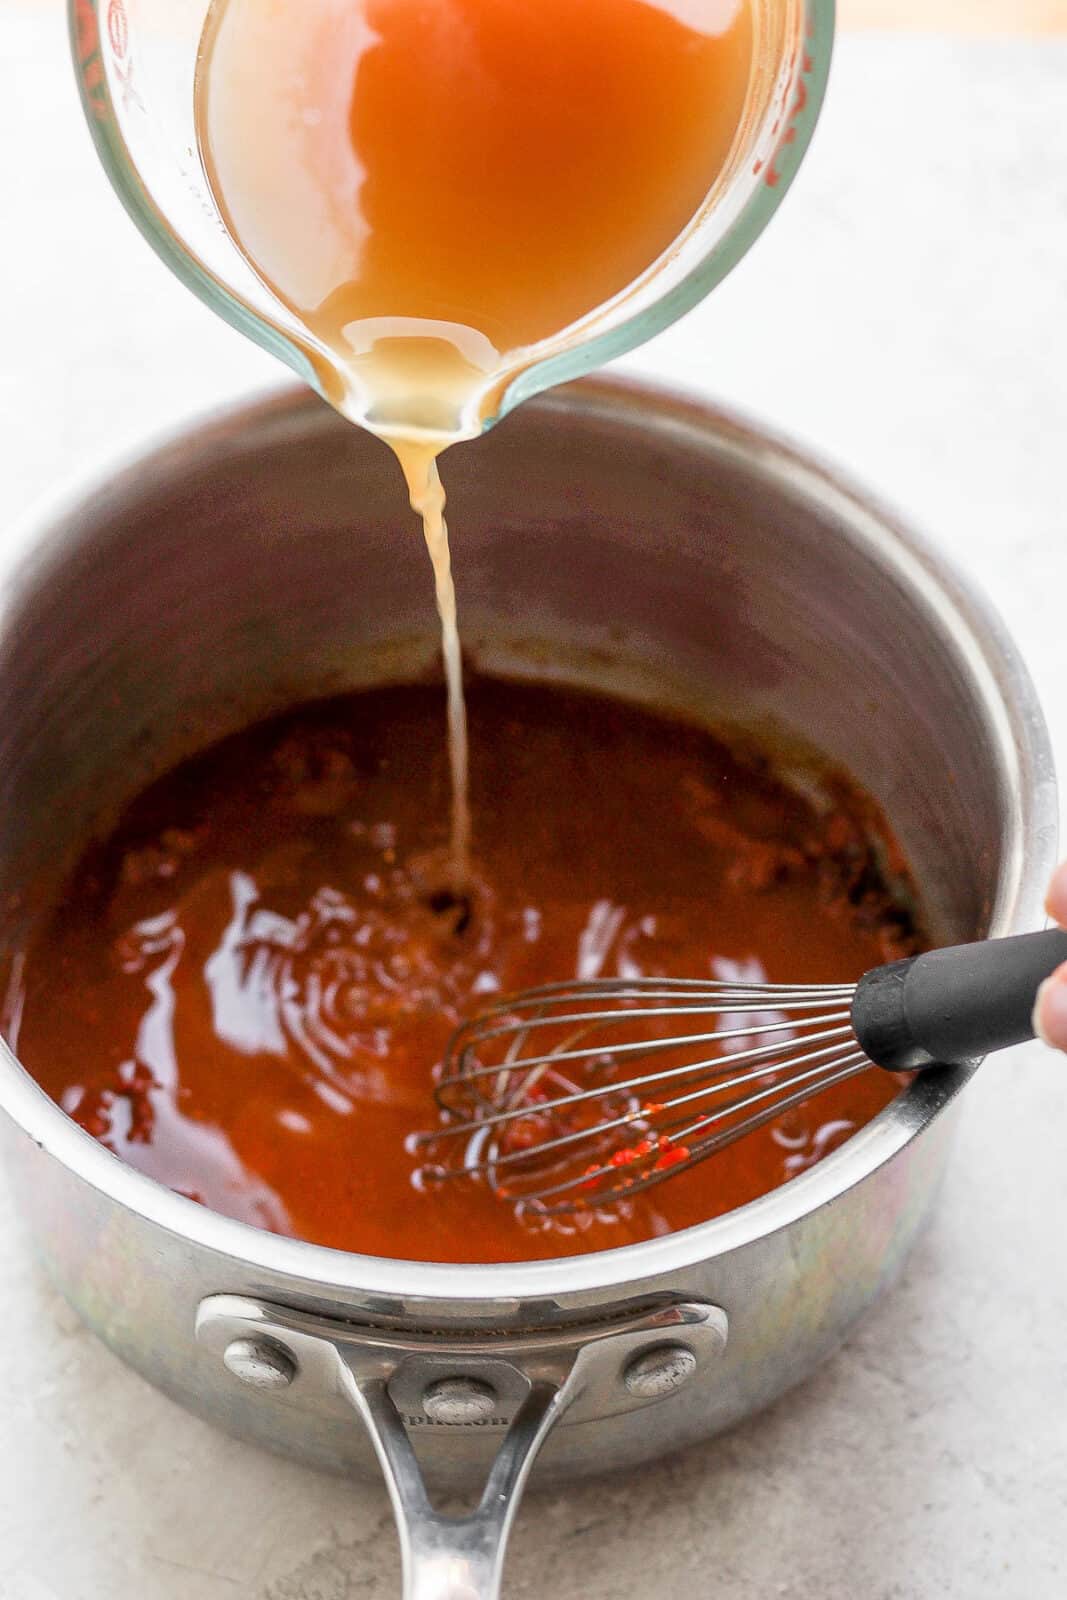 Chicken broth being poured into enchilada sauce in a saucepan and a whisk.